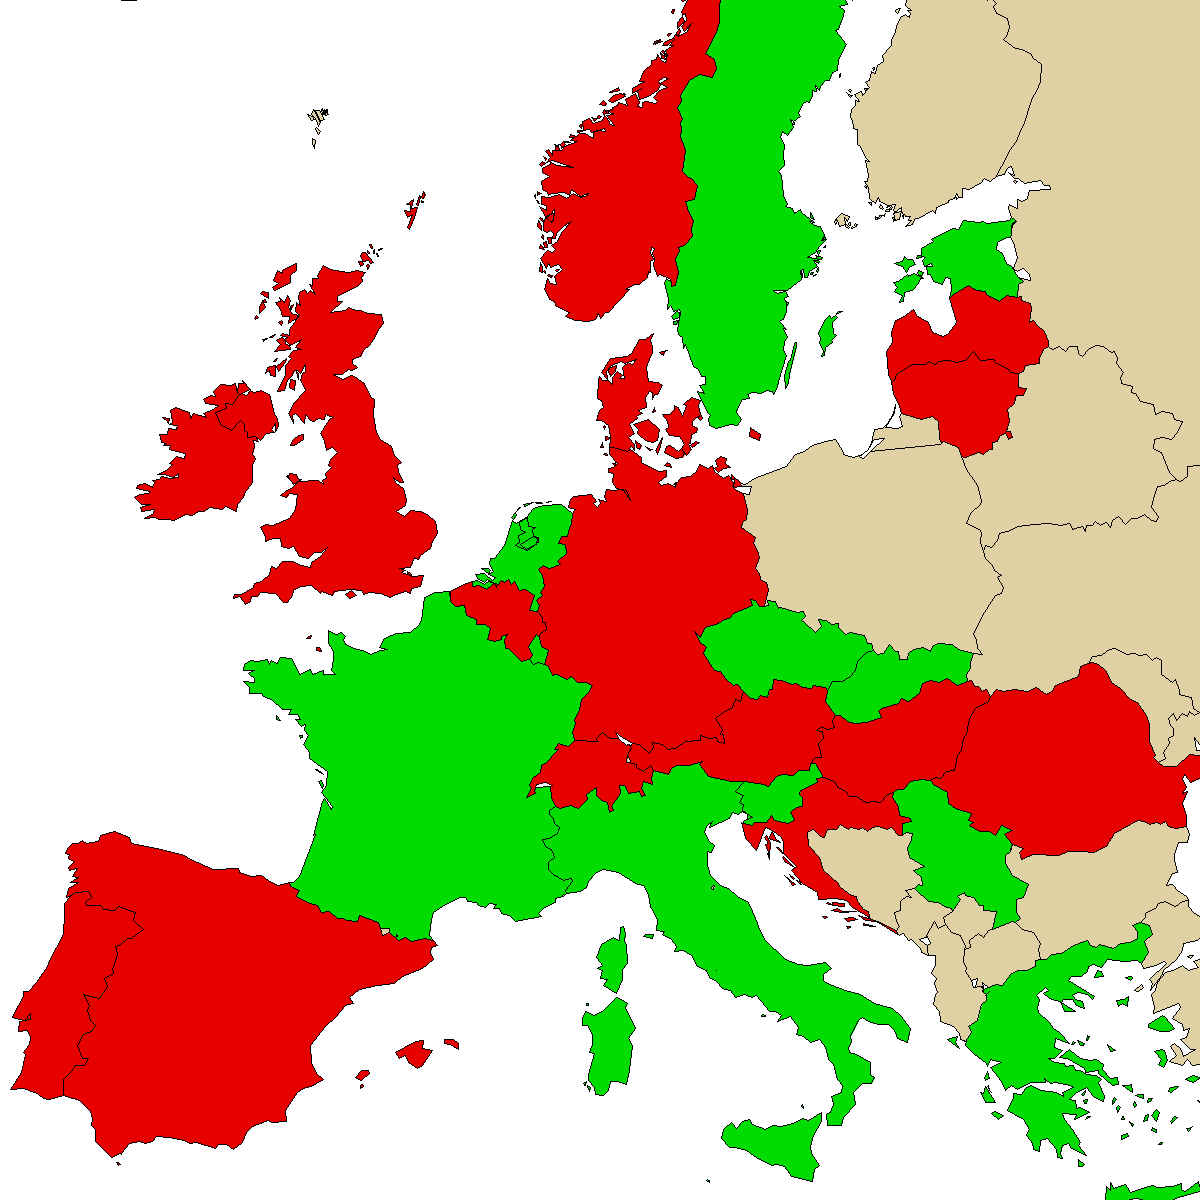 legal info map for our product 3MMA, green are countries where we found no ban, red with ban, grey is unknown